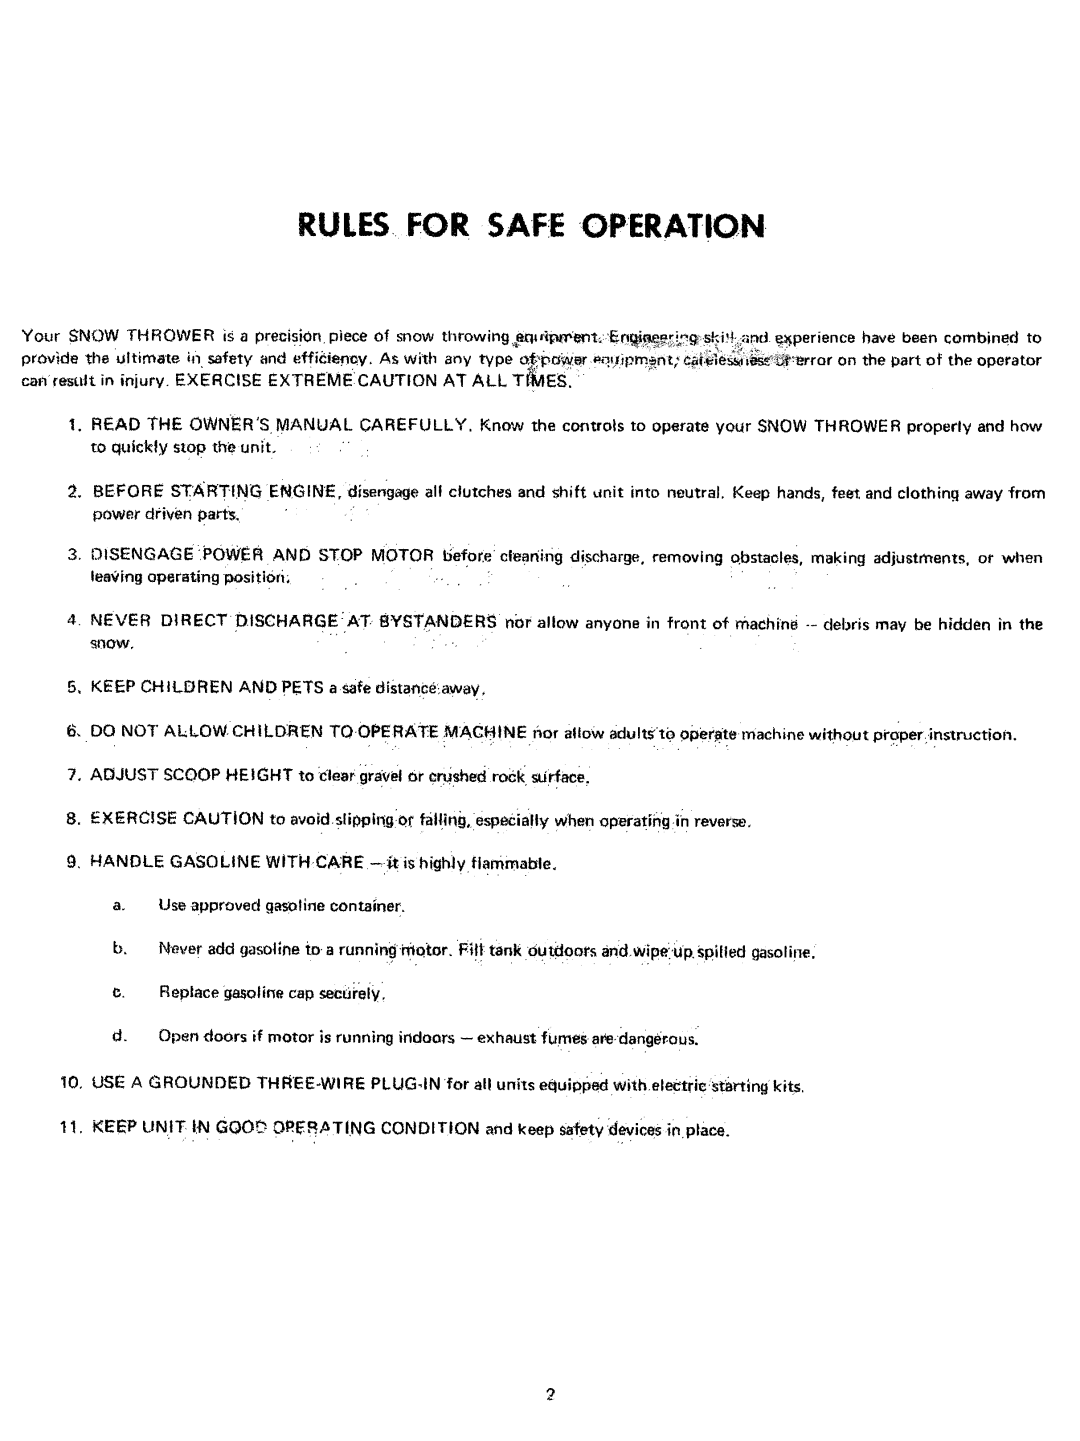 Yard-Man 7100-2 manual Rules For Safe Operation, power drivenparts 